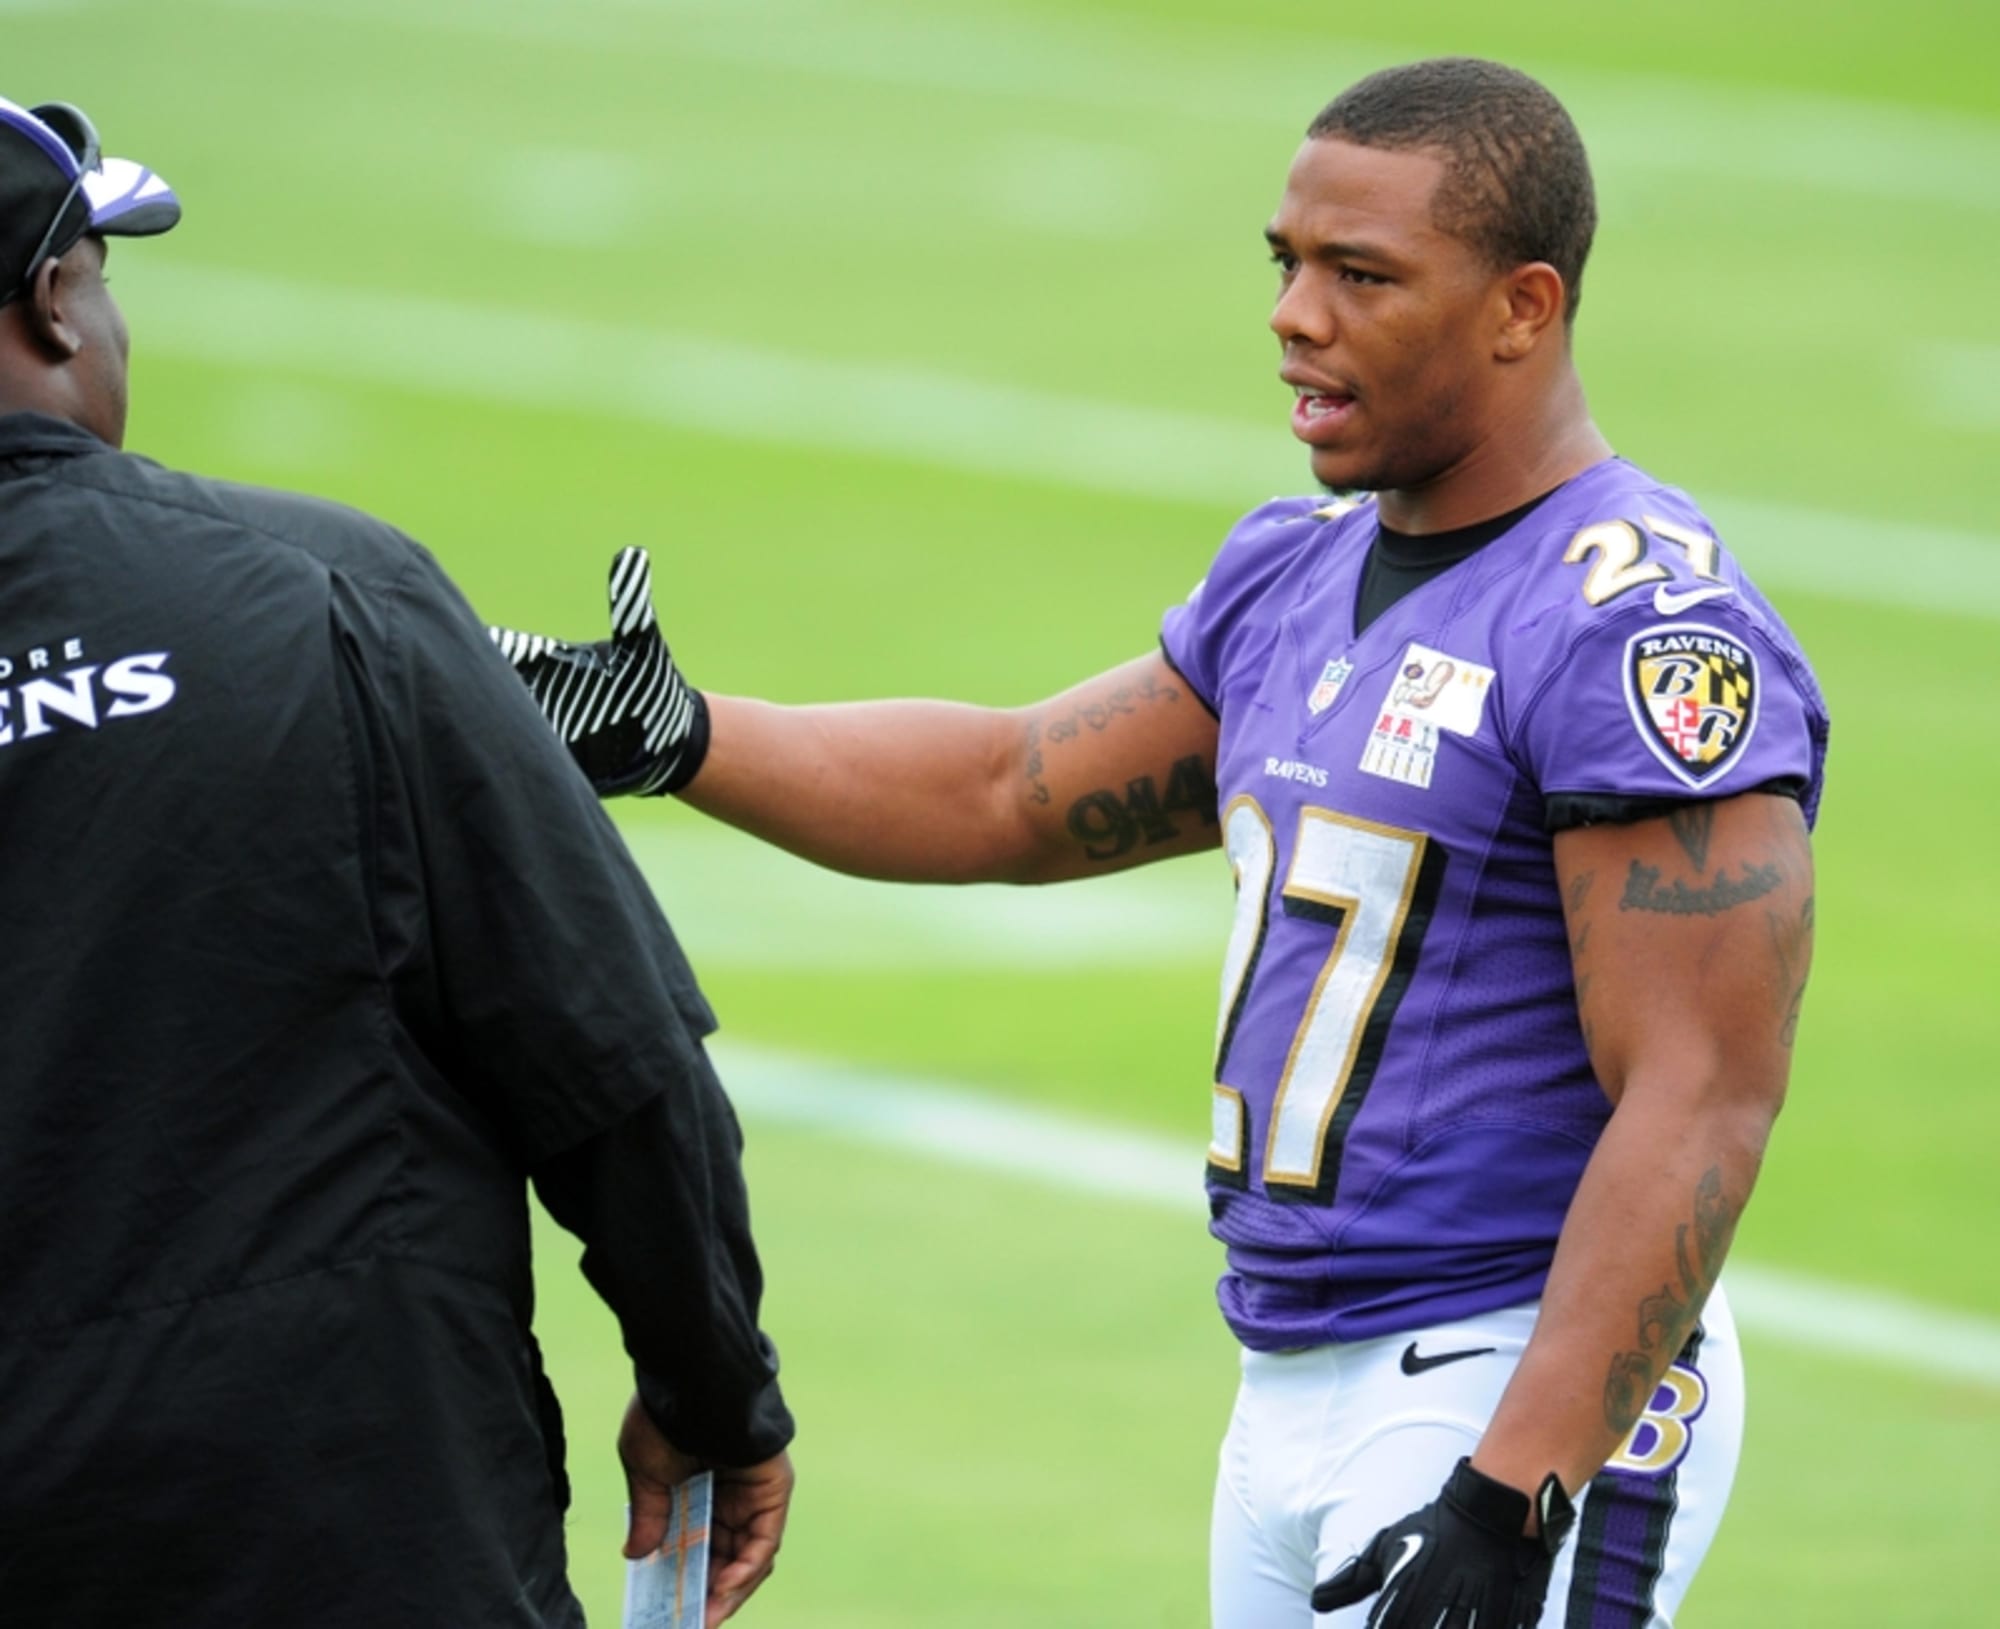 Ray Rice Ravens Jerseys: Fans Wear Them After Video of Domestic Abuse